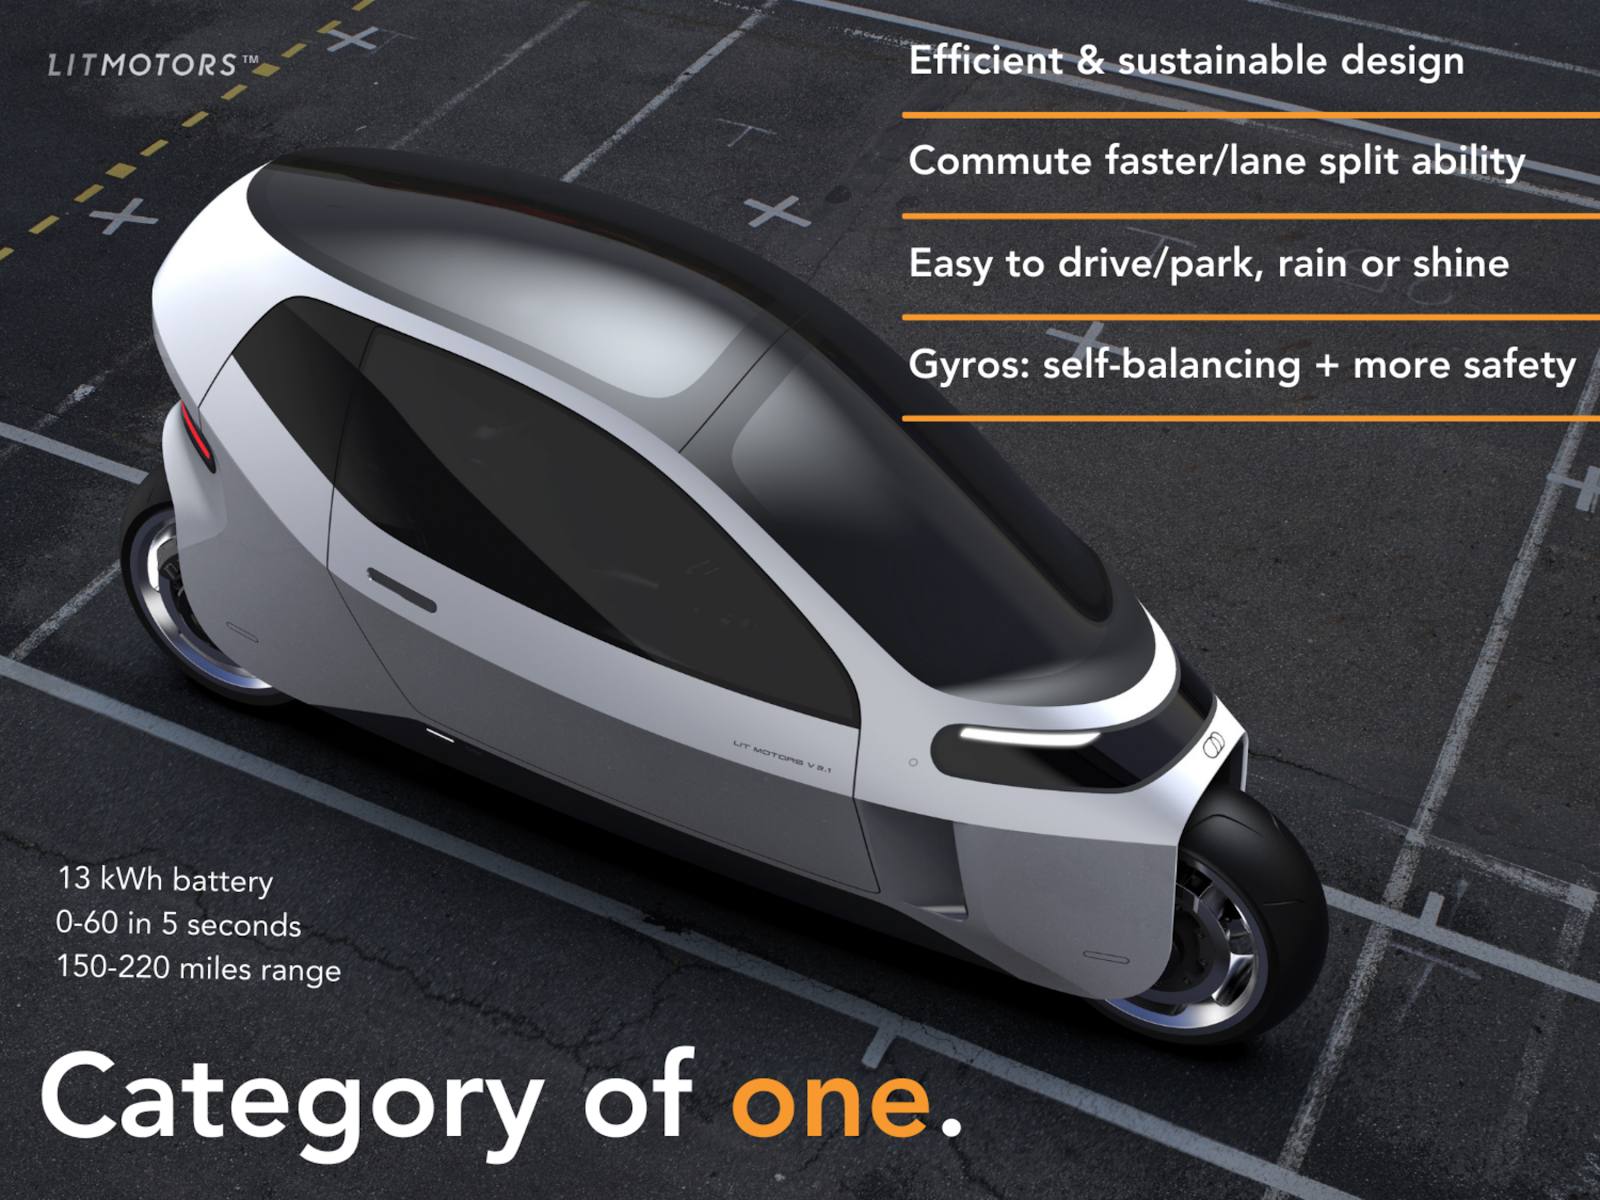 Category of one: compact and easy to park, seats two, commute faster with lane splitting, easy to drive and park, gyros are self-balancing and more safe.